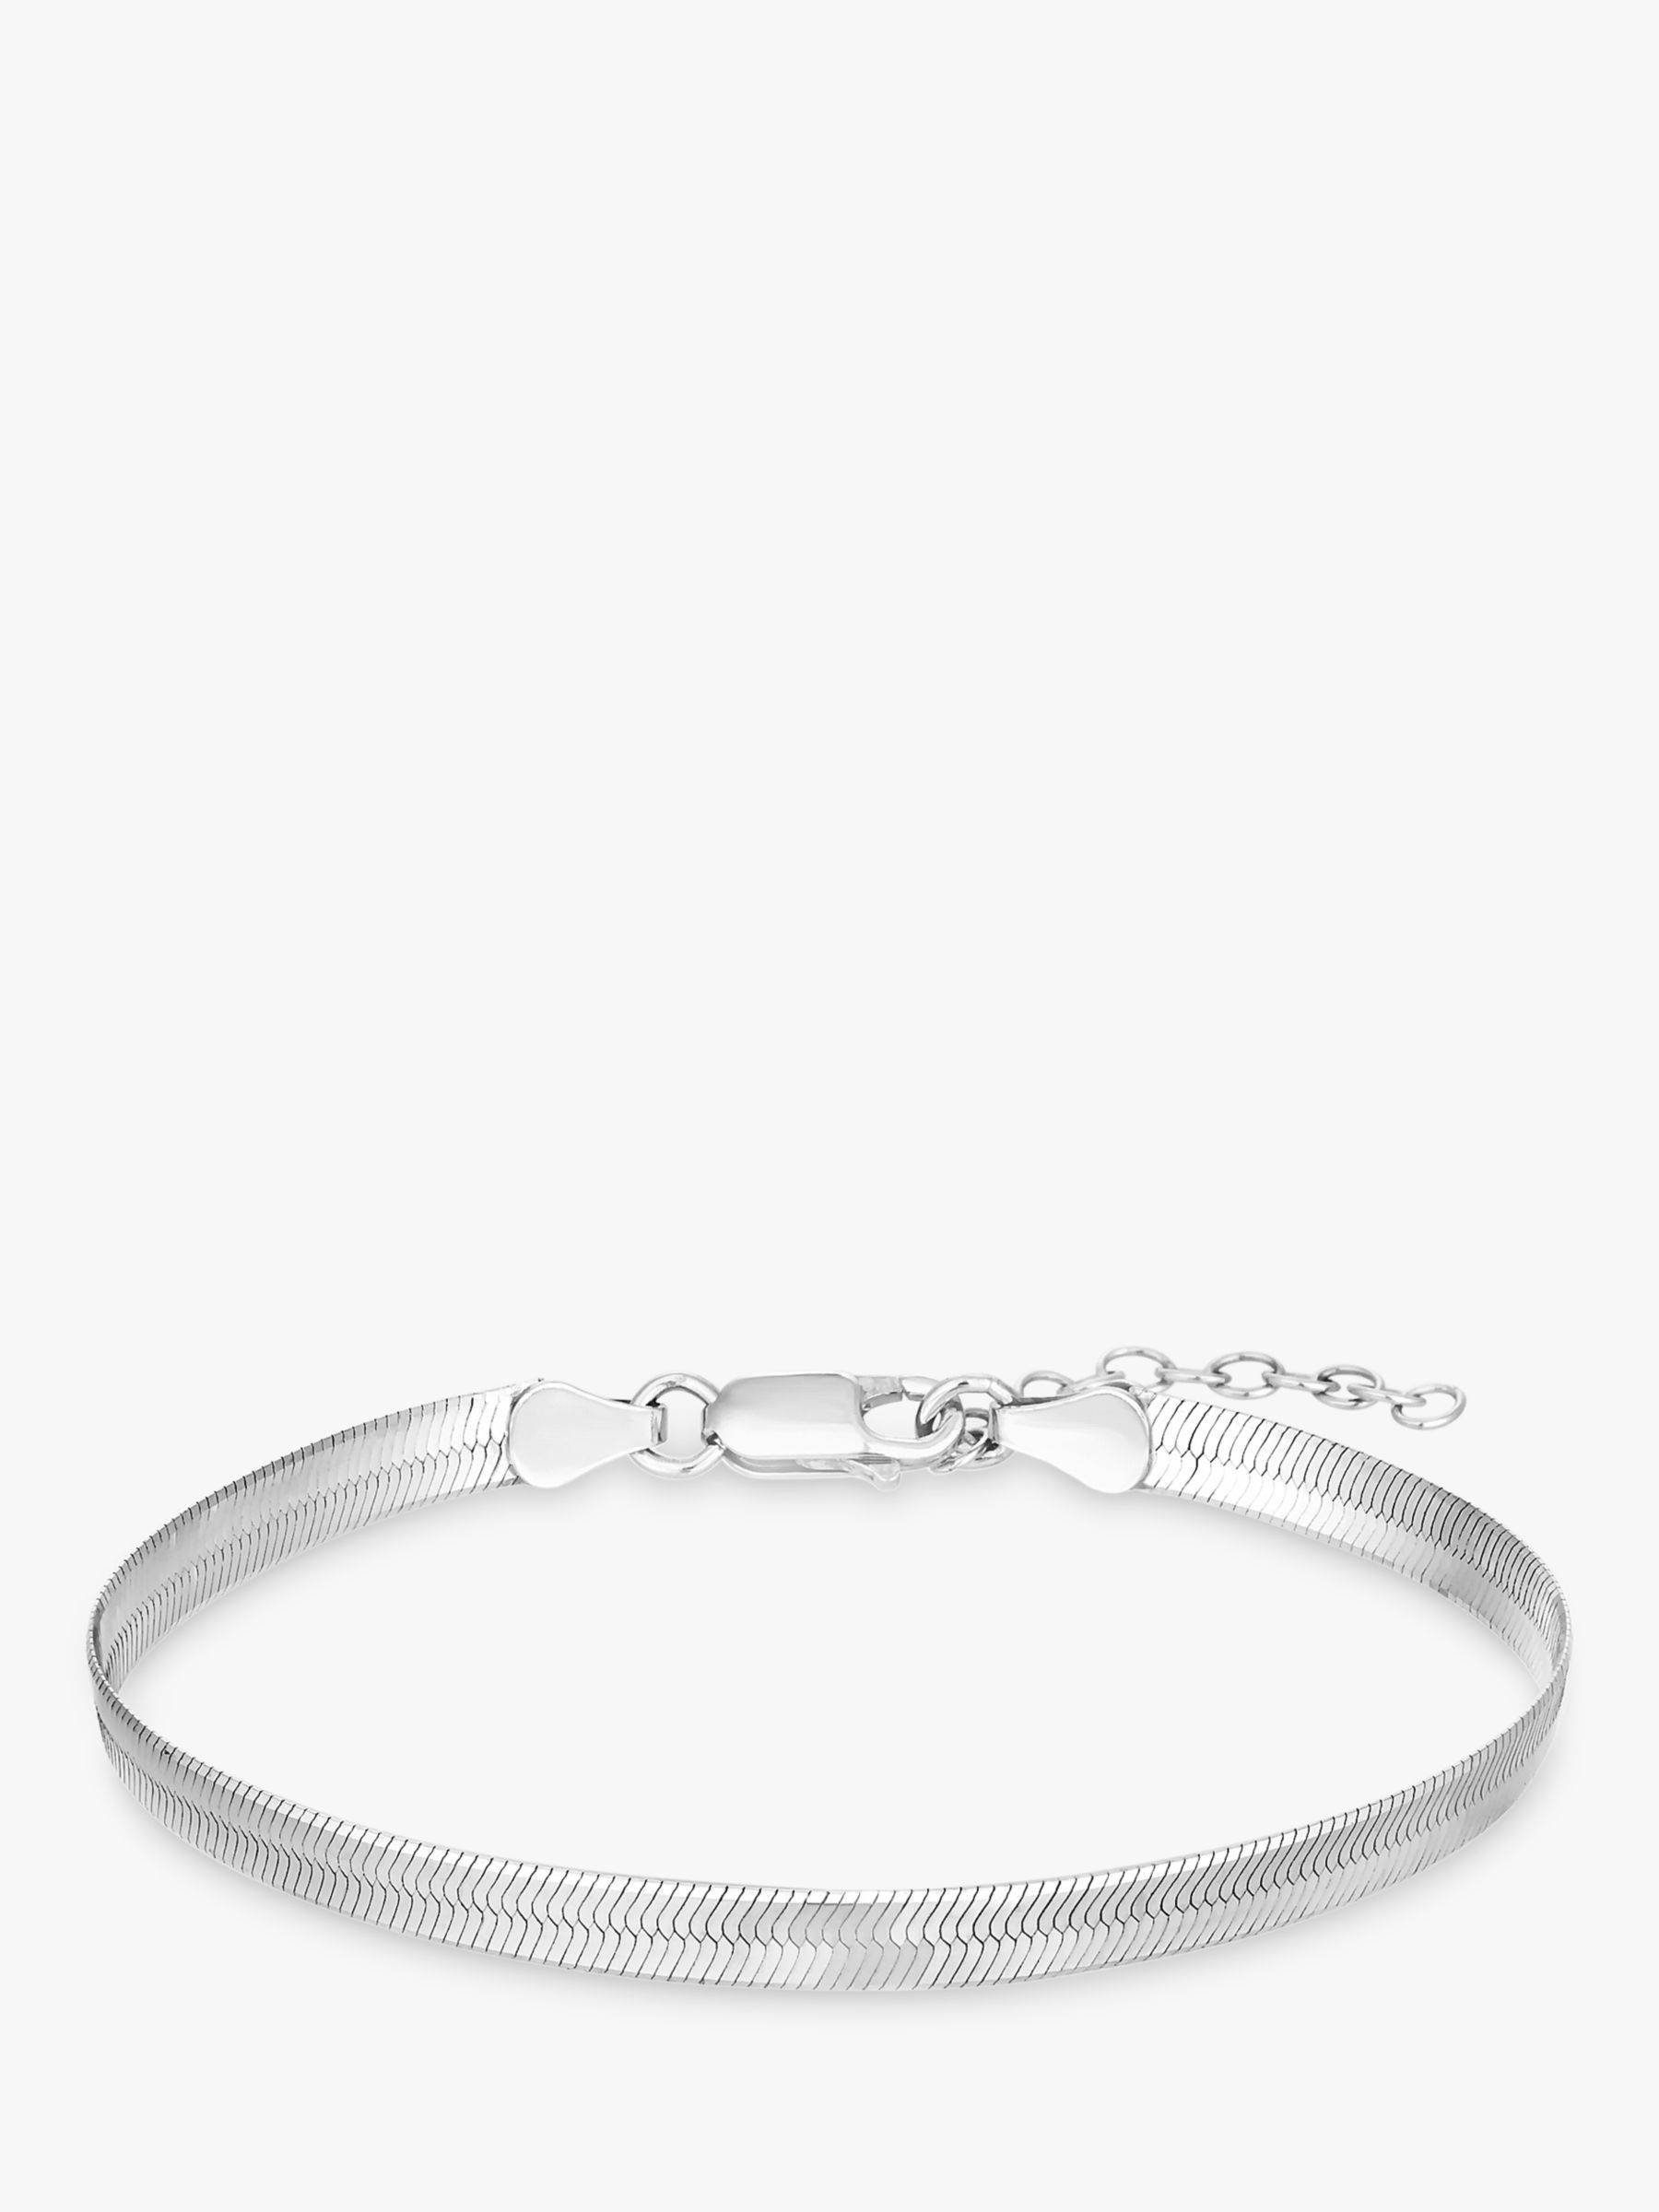 Buy Simply Silver Flat Snake Chain Bracelet, Silver Online at johnlewis.com